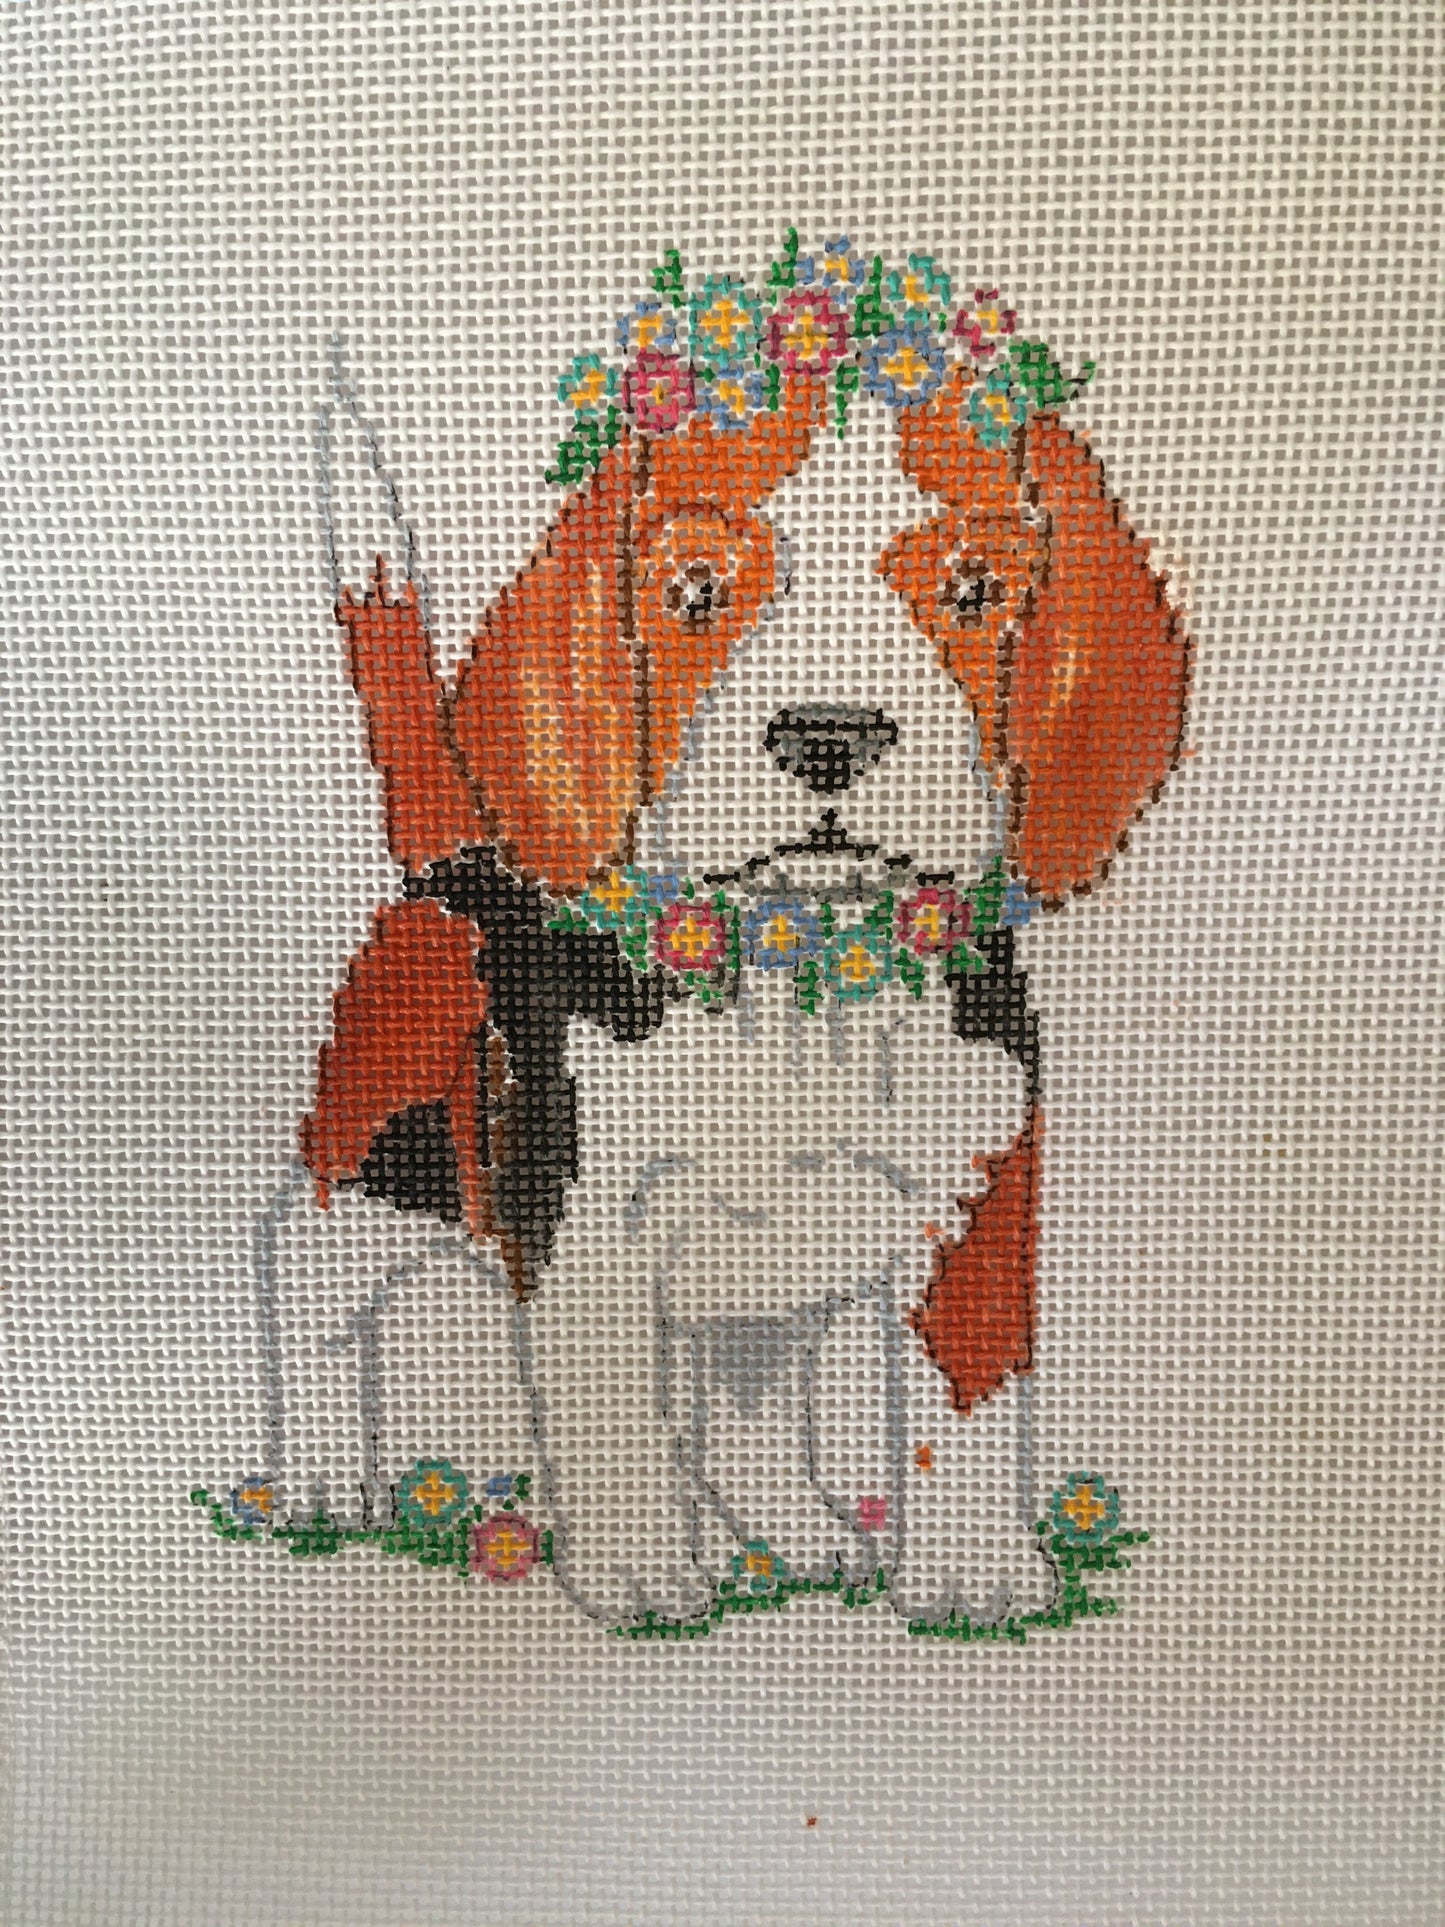 #5 May dog with stitch guide